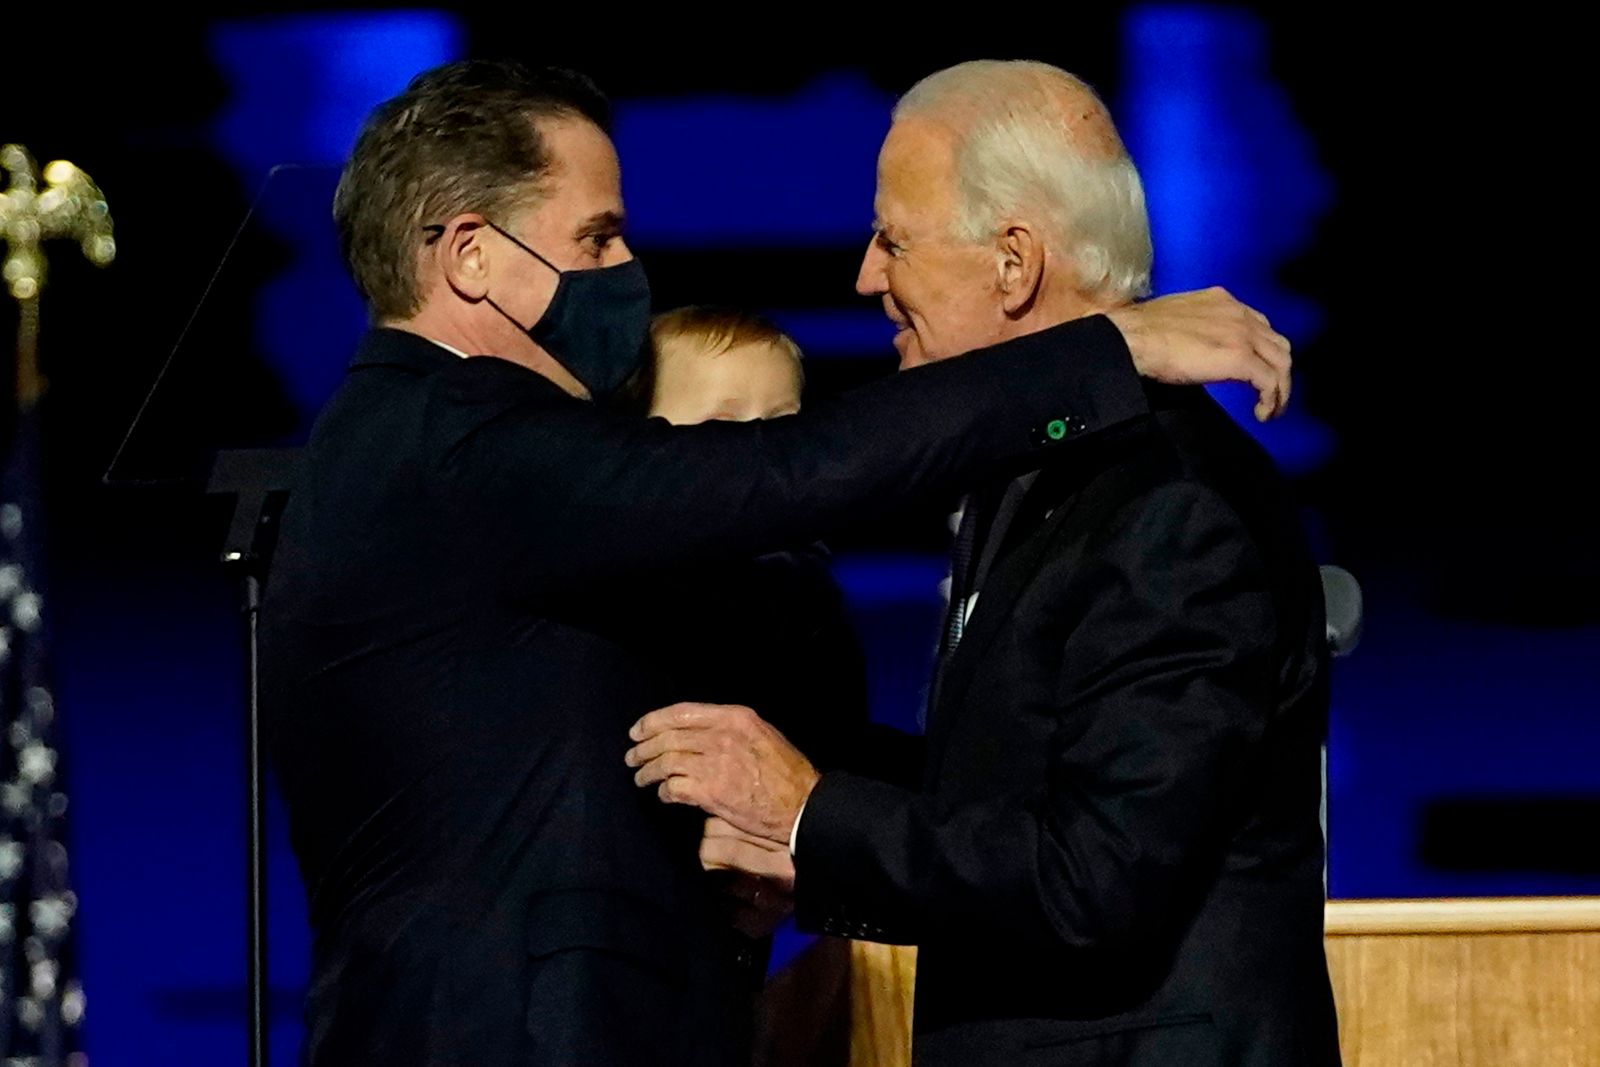 (FILES) In this file photo taken on November 07, 2020 US President-elect Joe Biden (R) embraces his son Hunter Biden (L) on stage after delivering remarks in Wilmington, Delaware. - US President-elect Joe Biden's son Hunter, a frequent target of Republican attacks during the 2020 election campaign, said December 9, 2020, he is under investigation for potential tax violations. (Photo by Andrew Harnik / POOL / AFP) - AFP